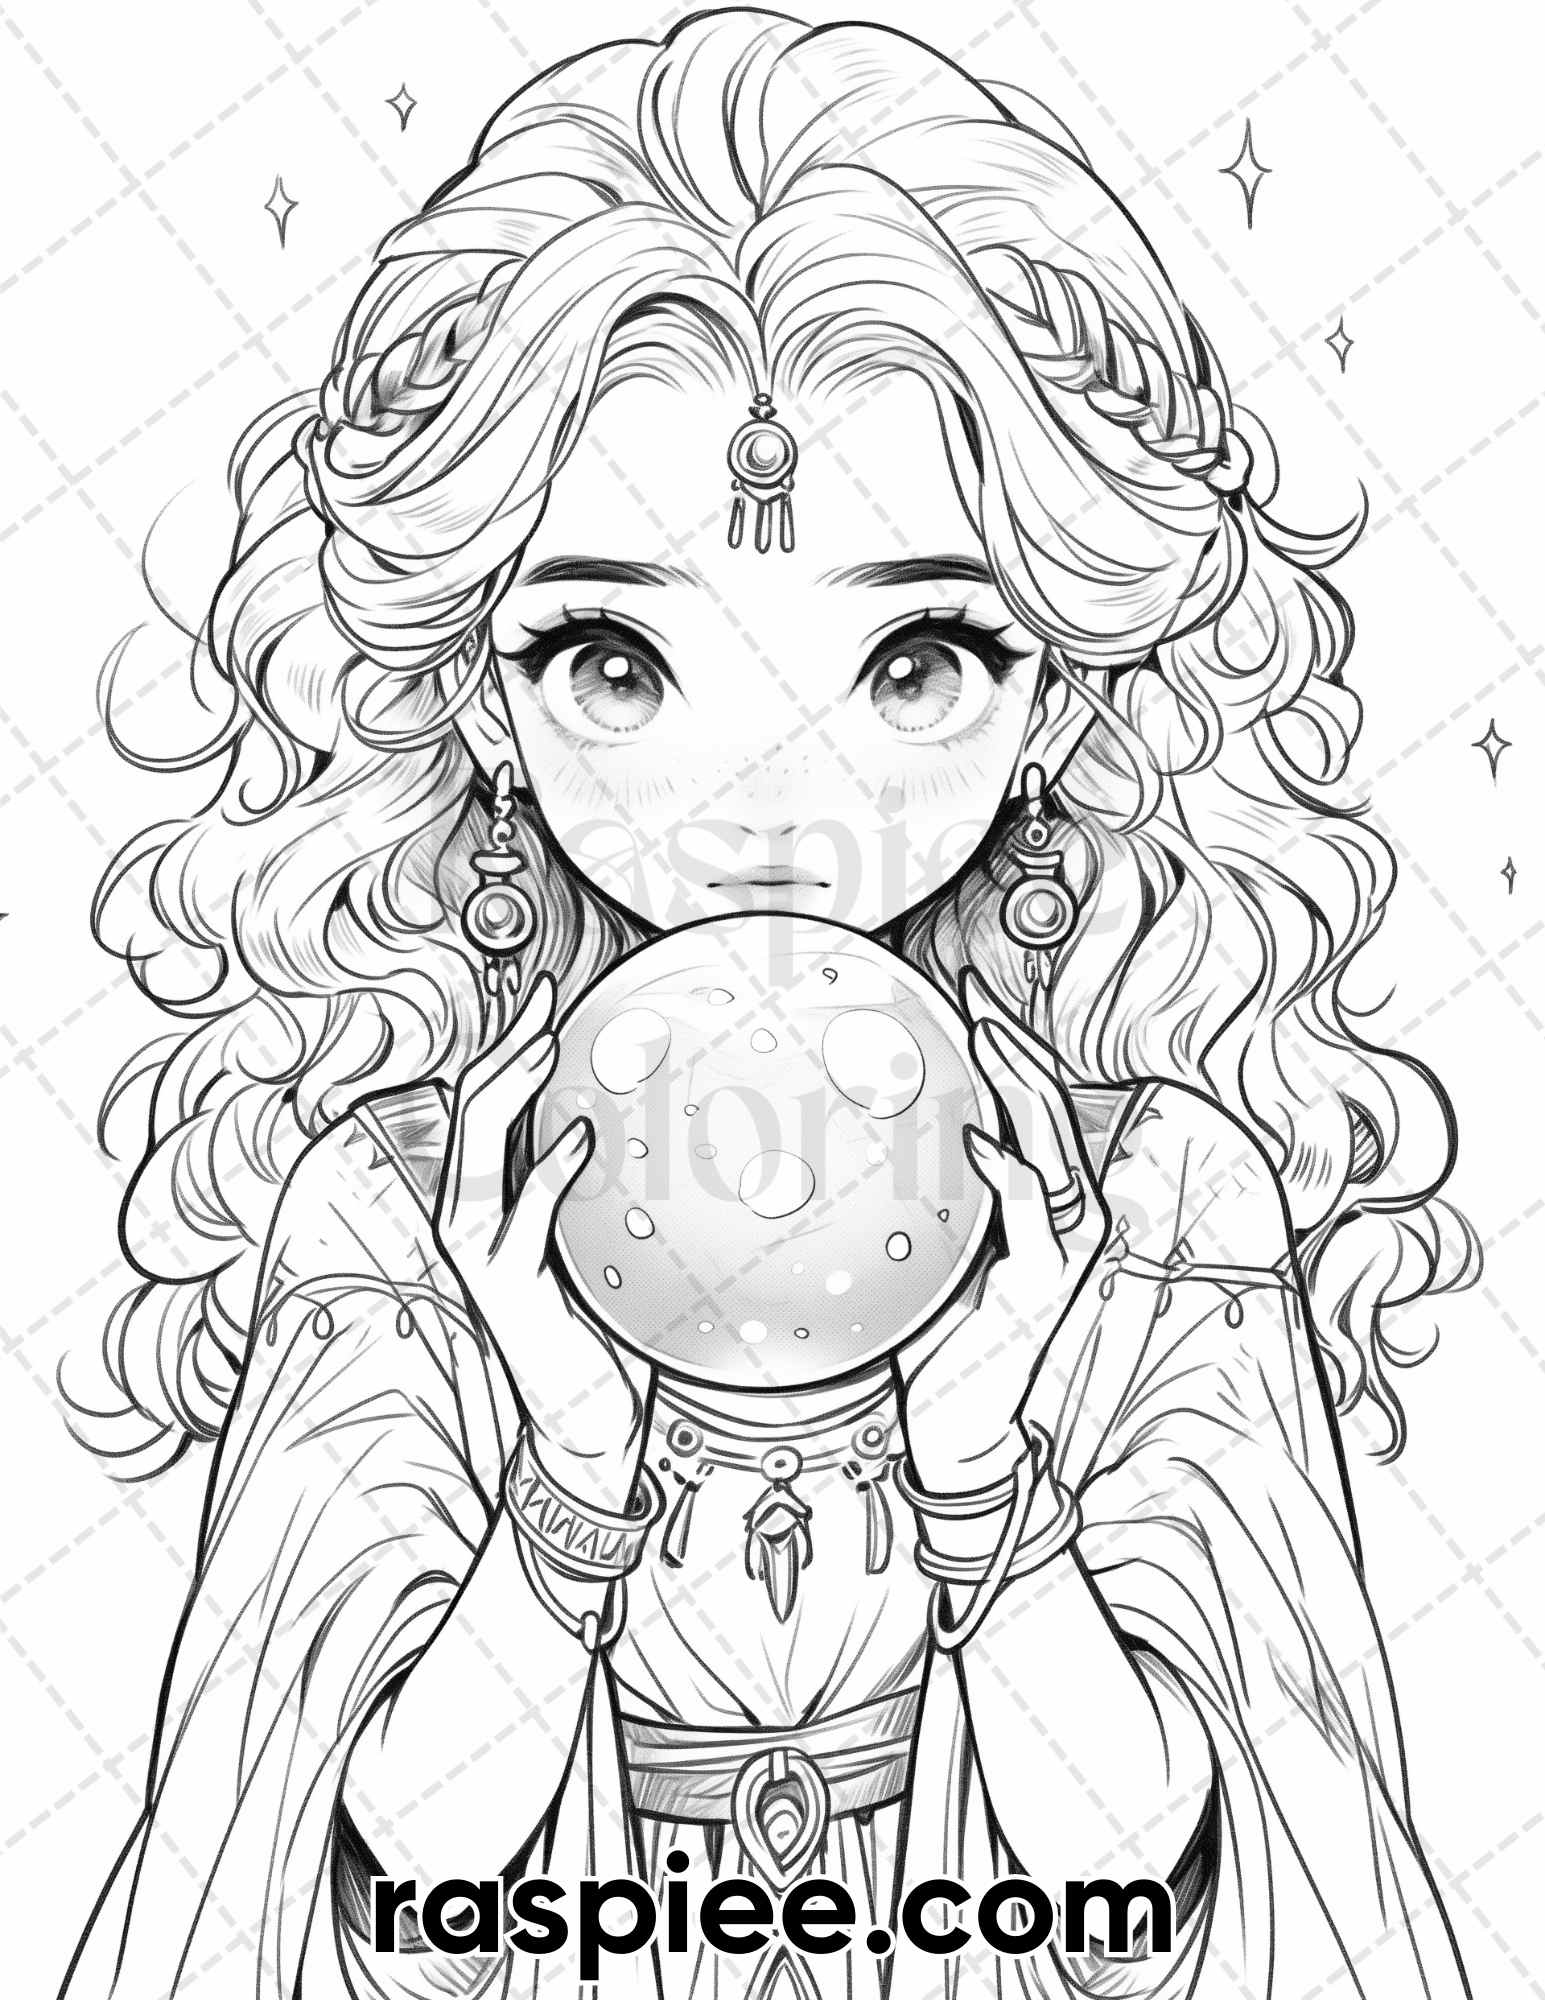 Cute Druid Girl Coloring Page, Fantasy Coloring Pages, Fantasy Coloring Book Printable, Relaxing Coloring for Adults, Grayscale Coloring Pages, Adult Coloring Pages